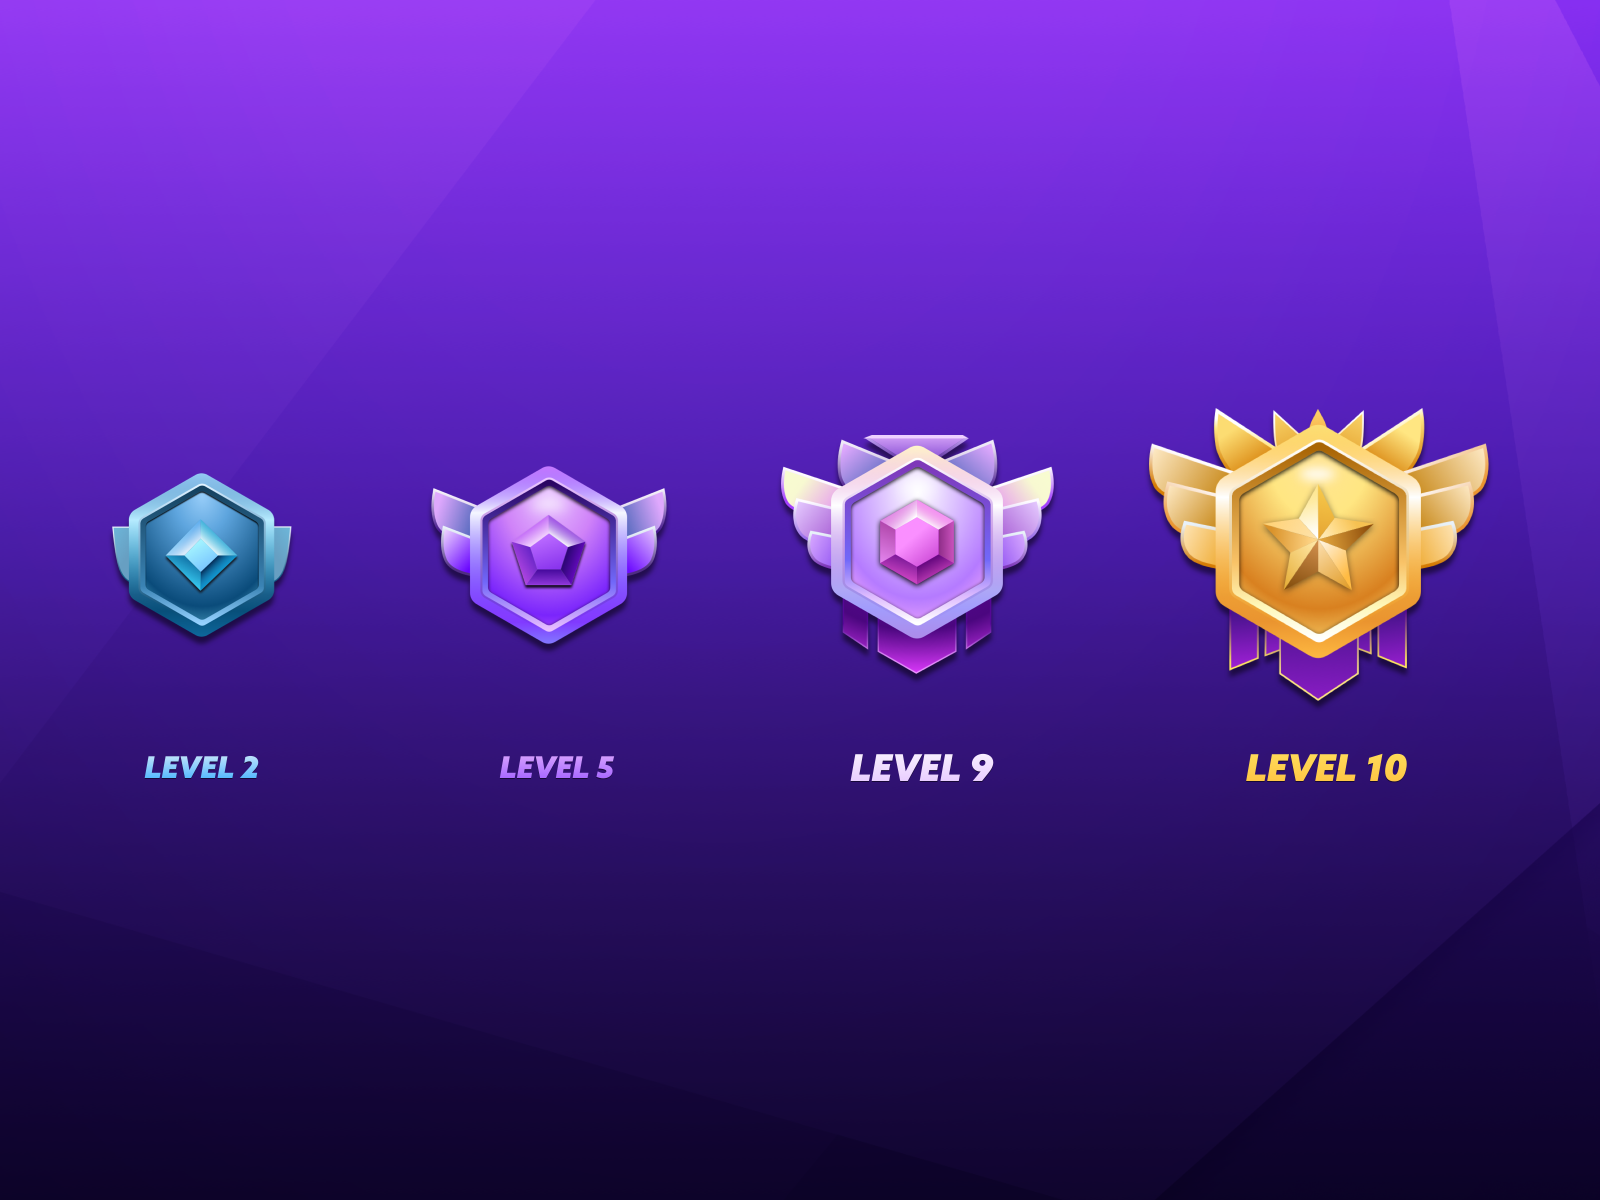 What's the best level 5 badge?